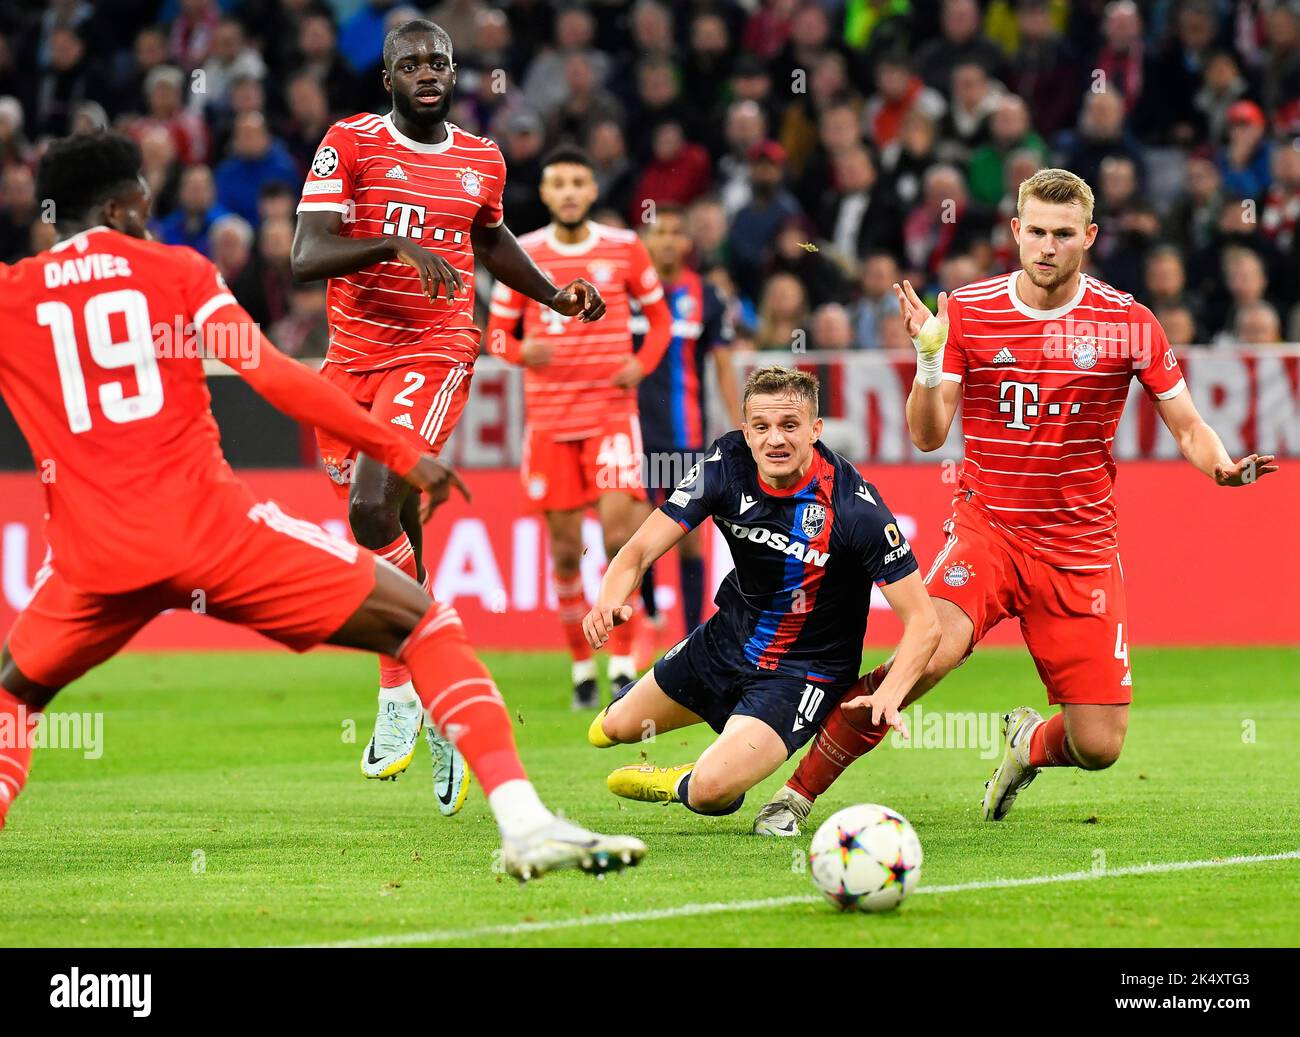 Mnichov, Germany. 04th Oct, 2022. (L-R) Alphonso Davies and Dayot Upamecano of Bayern, Jan Kopic of Plzen and Matthijs de Ligt of Bayern in action during the Champions League, 3rd round, Group C match Bayern Munich vs Viktoria Plzen in Munich, Germany, October 4, 2022. Credit: Miroslav Chaloupka/CTK Photo/Alamy Live News Stock Photo